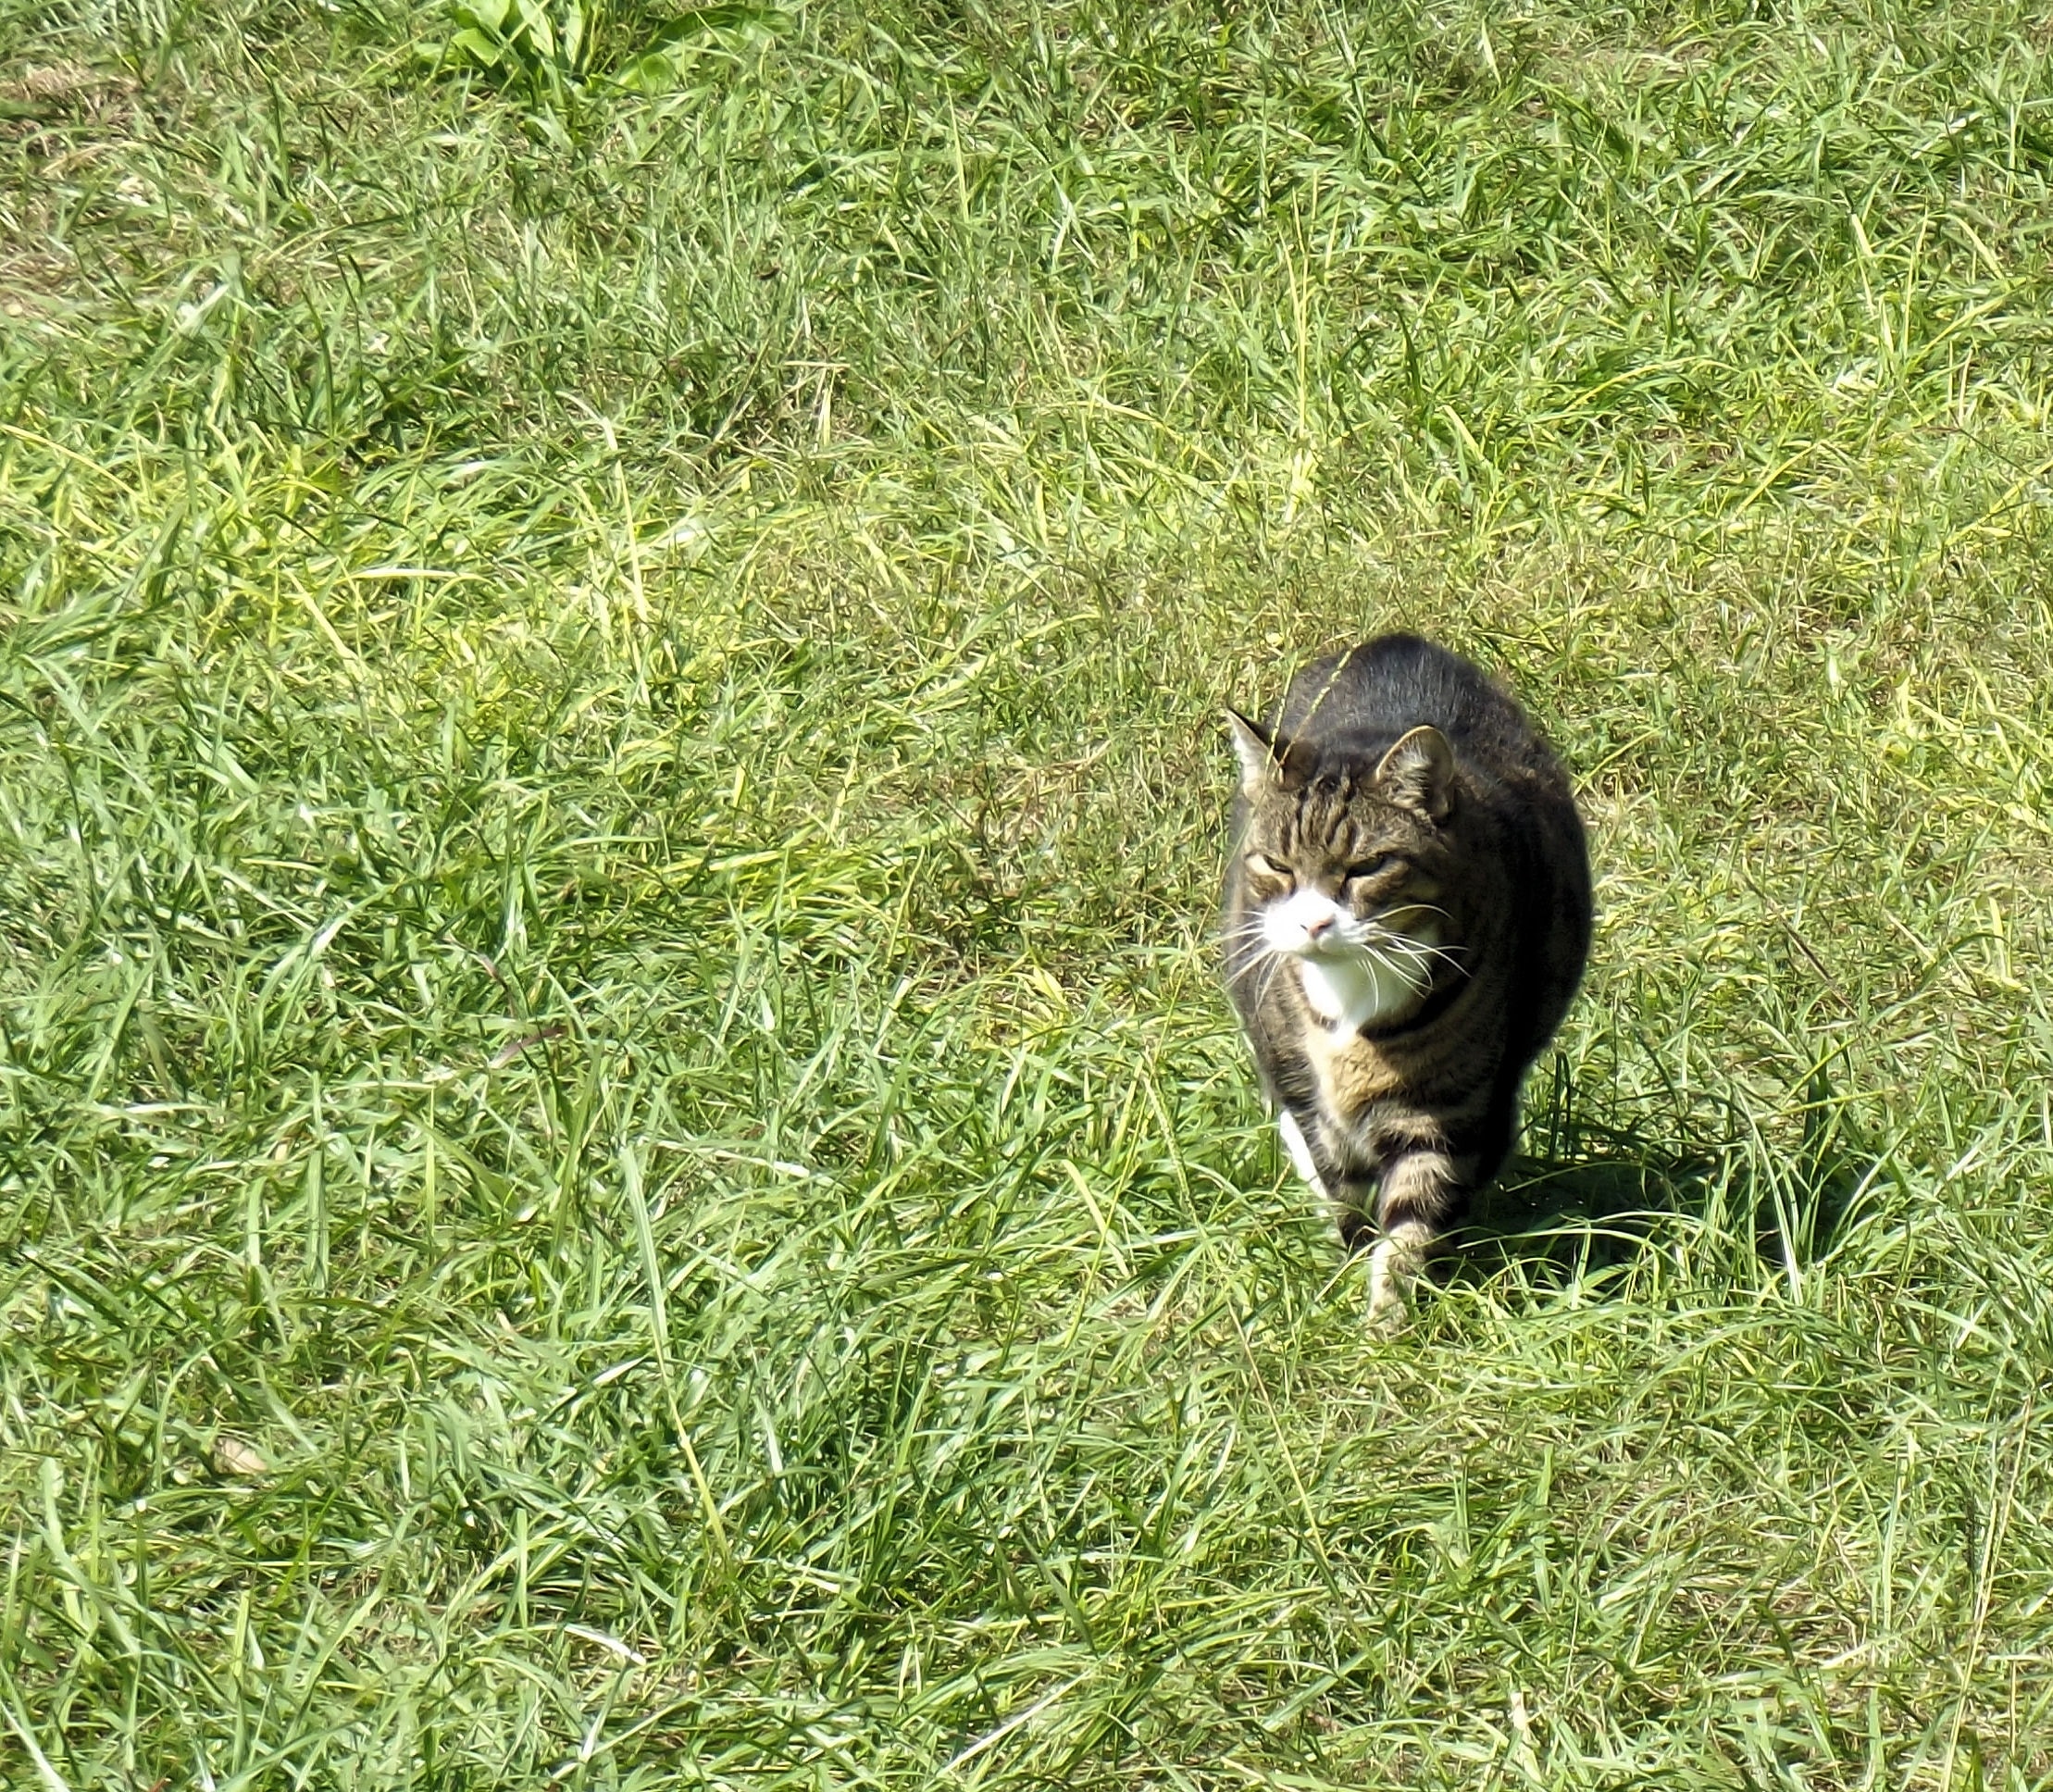 brown and white tabby cat walking on green grass field during daytime